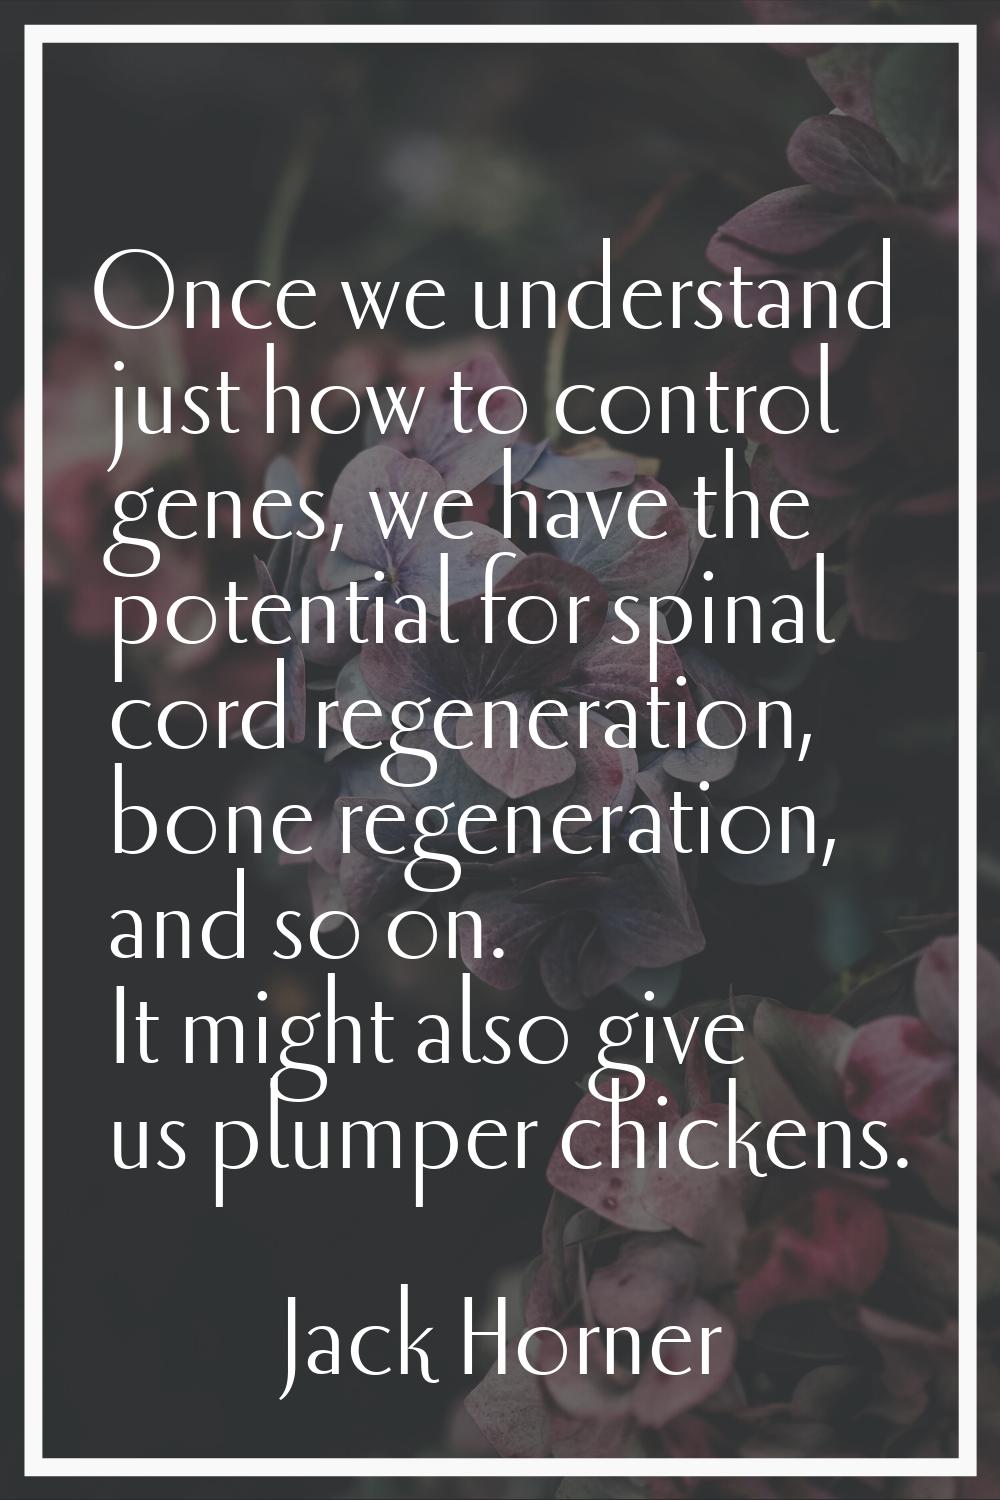 Once we understand just how to control genes, we have the potential for spinal cord regeneration, b